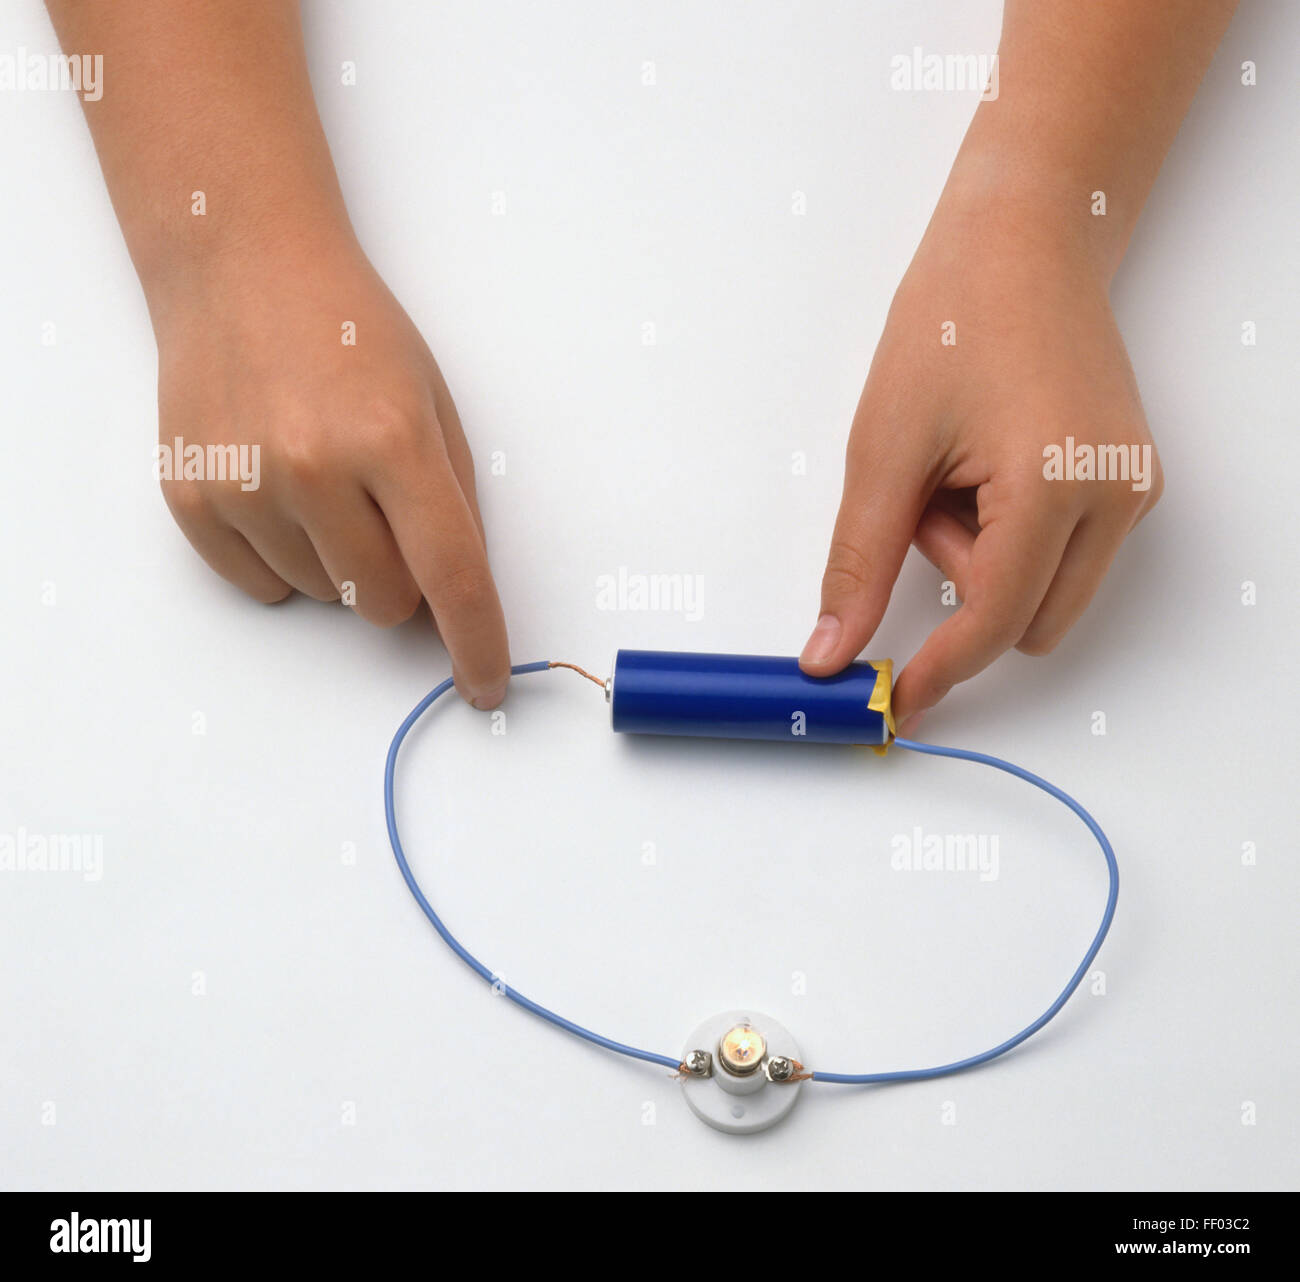 Girl's hands connecting wire with battery, making simple electric curcuit, close-up Stock Photo